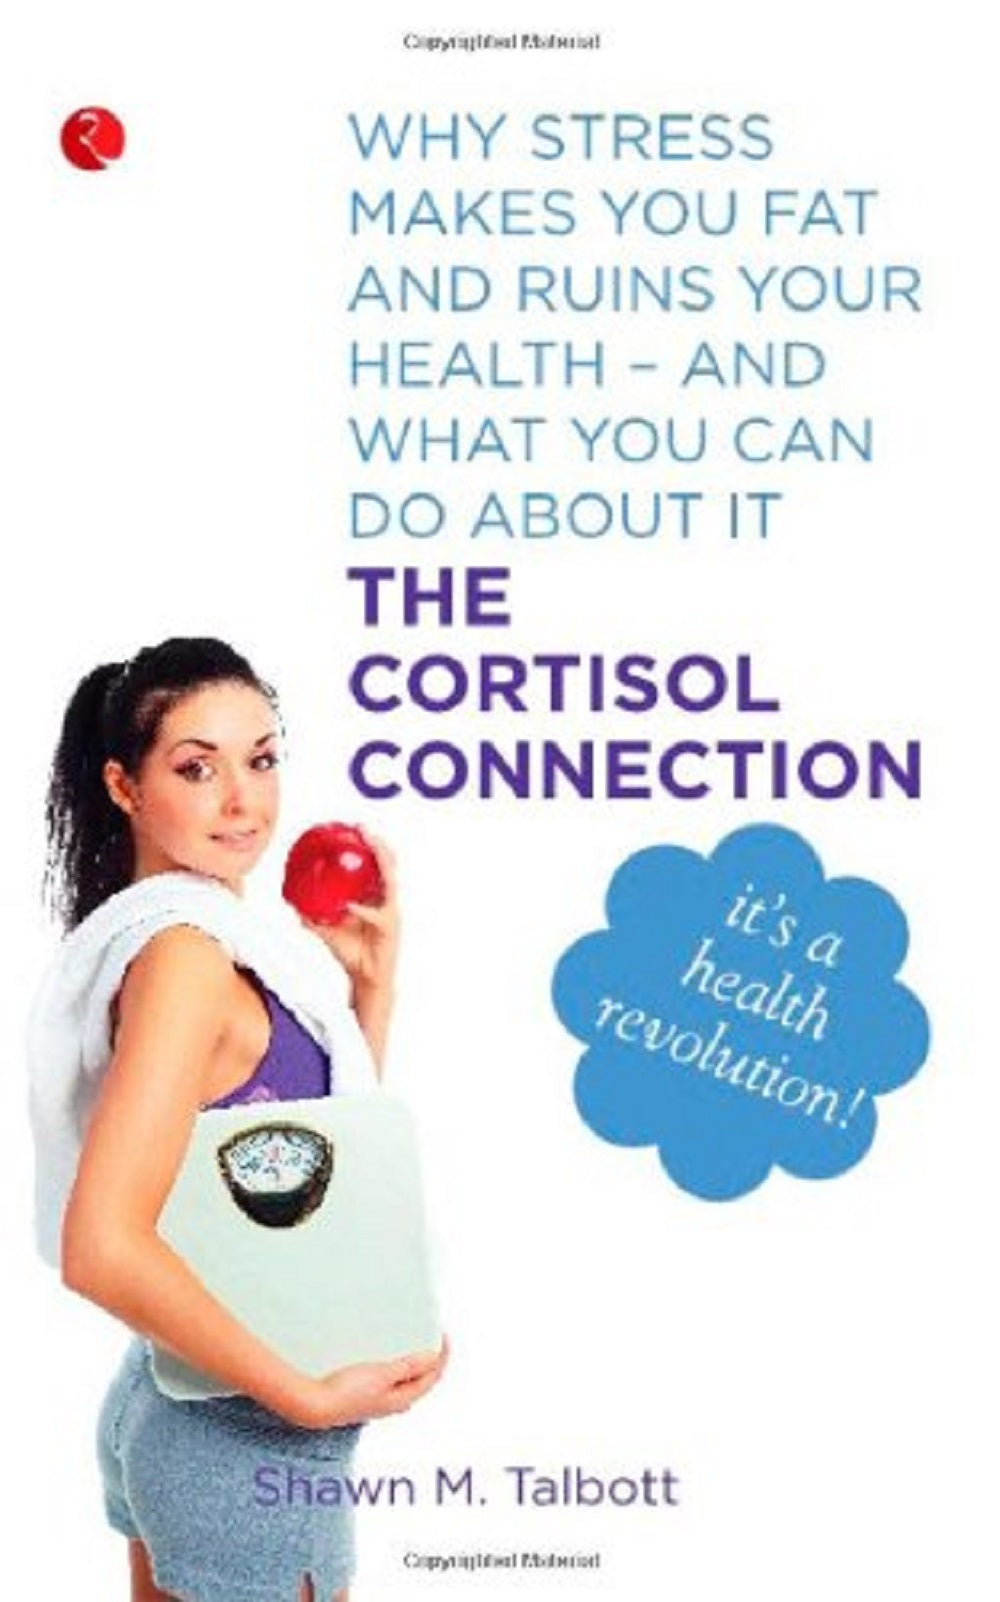 THE CORTISOL CONNECTION